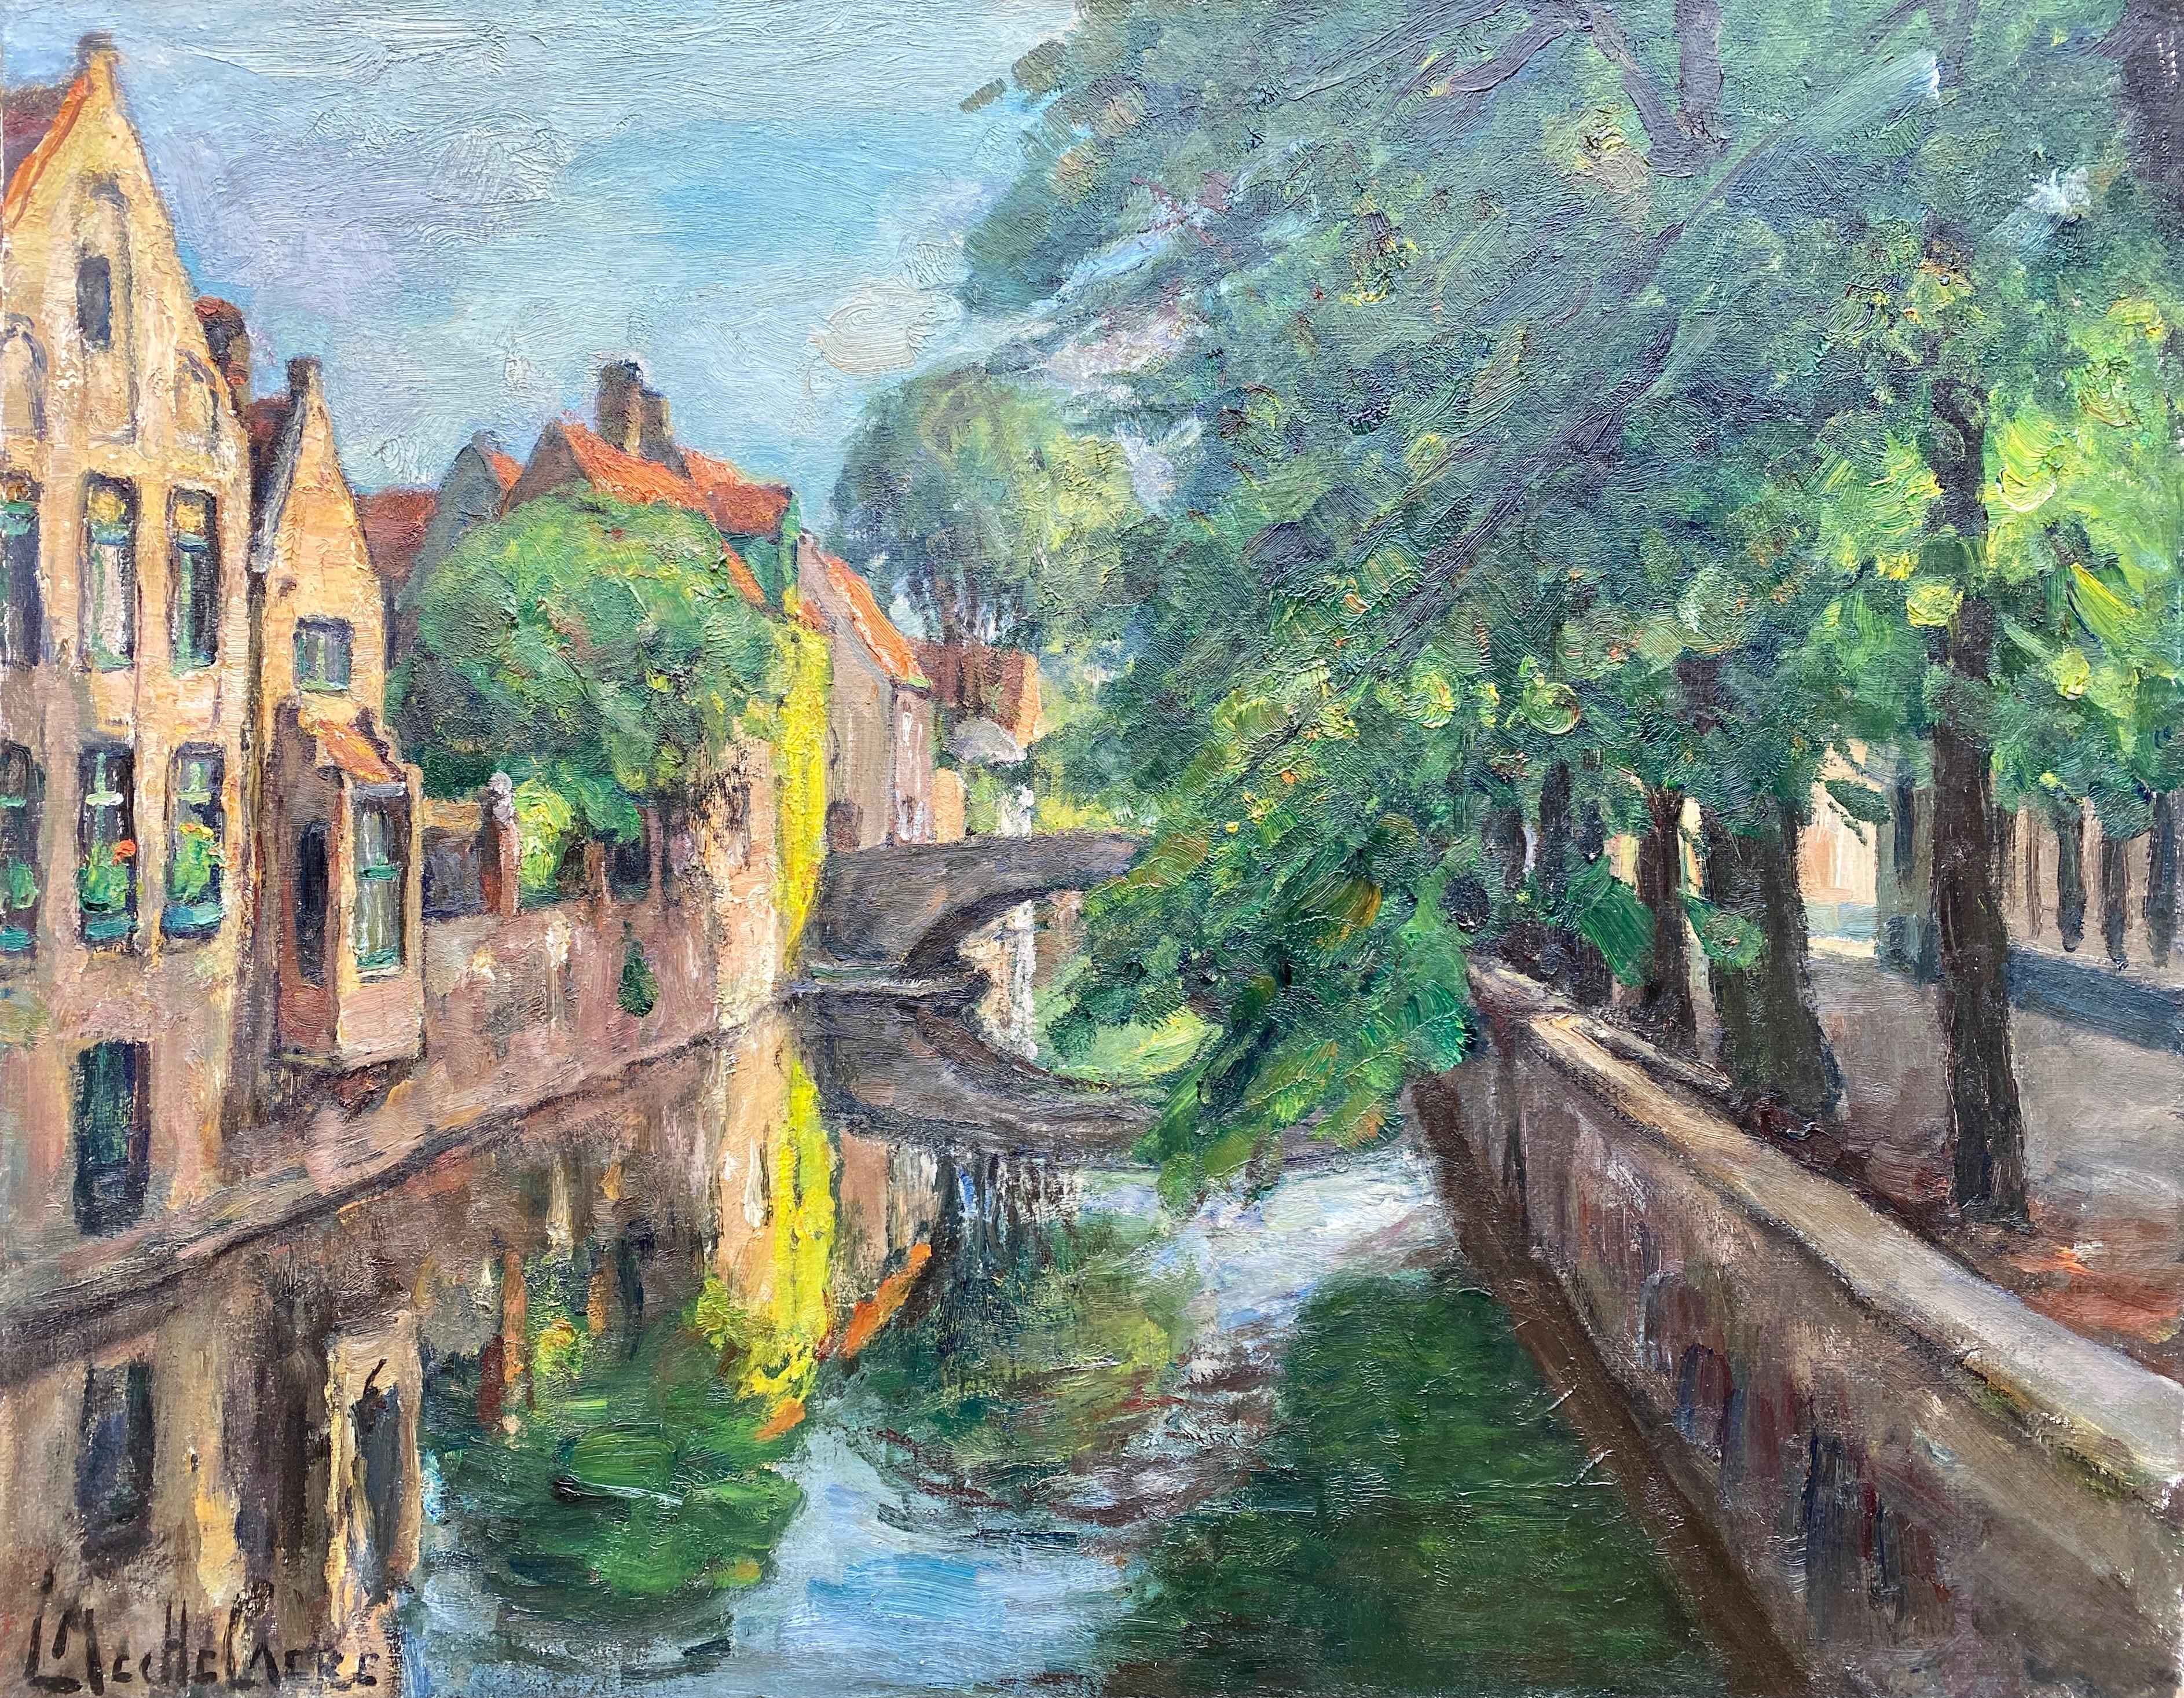 Mechelaere Leo Figurative Painting - A View of Bruges, Leo Mechelaere, Bruges 1880 – 1964 Erlangen, Bruges School